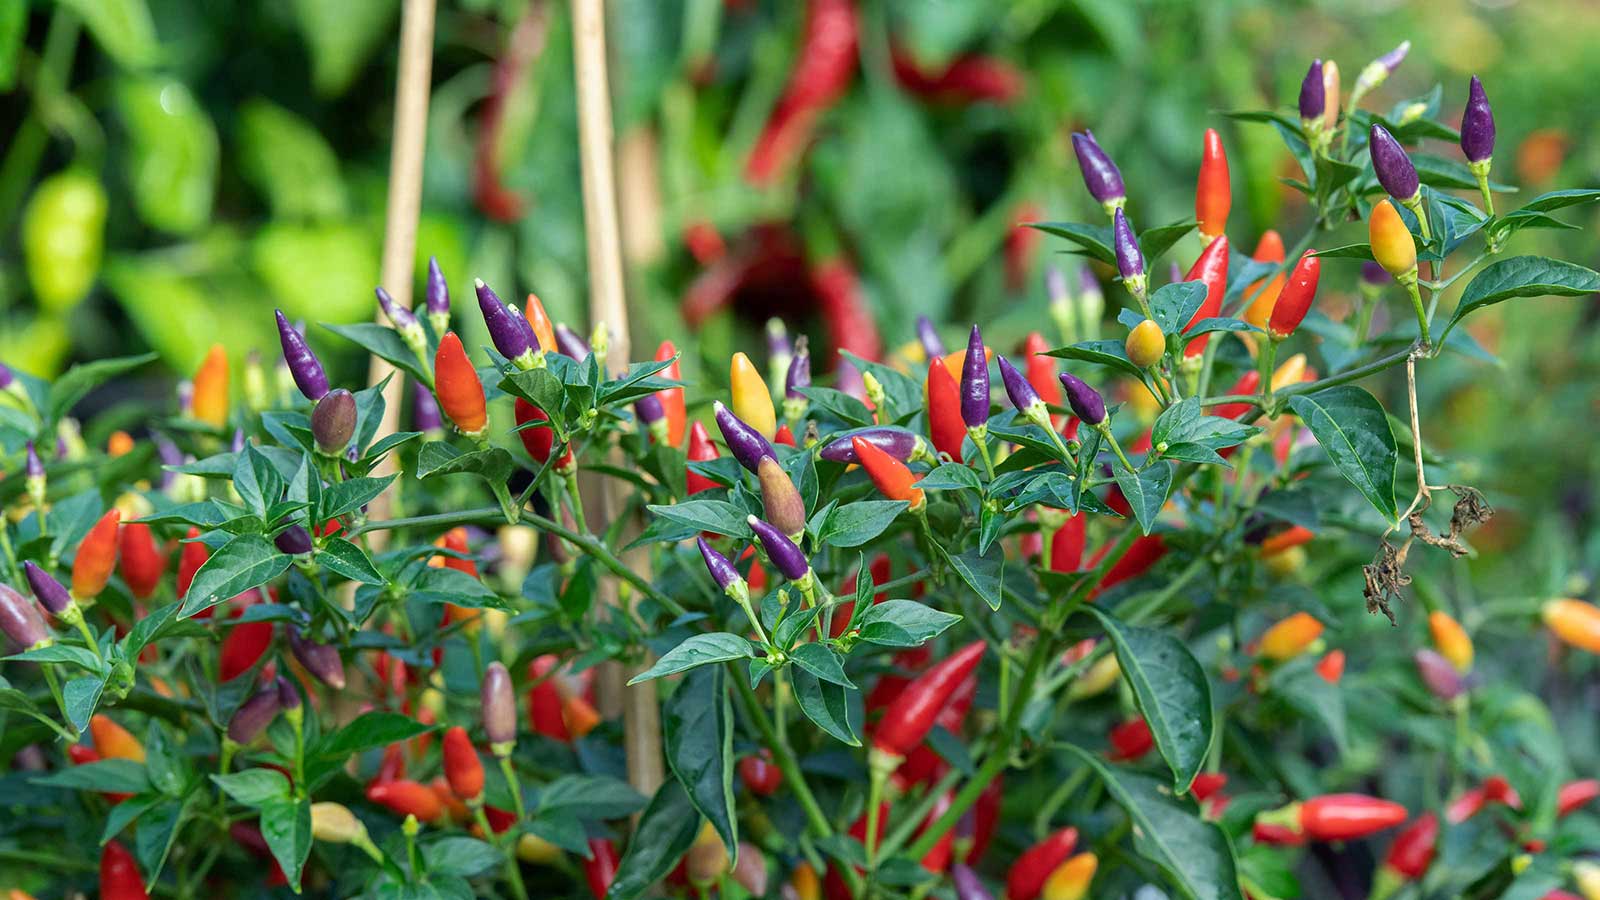 Types of chili peppers: the 10 best varieties to grow